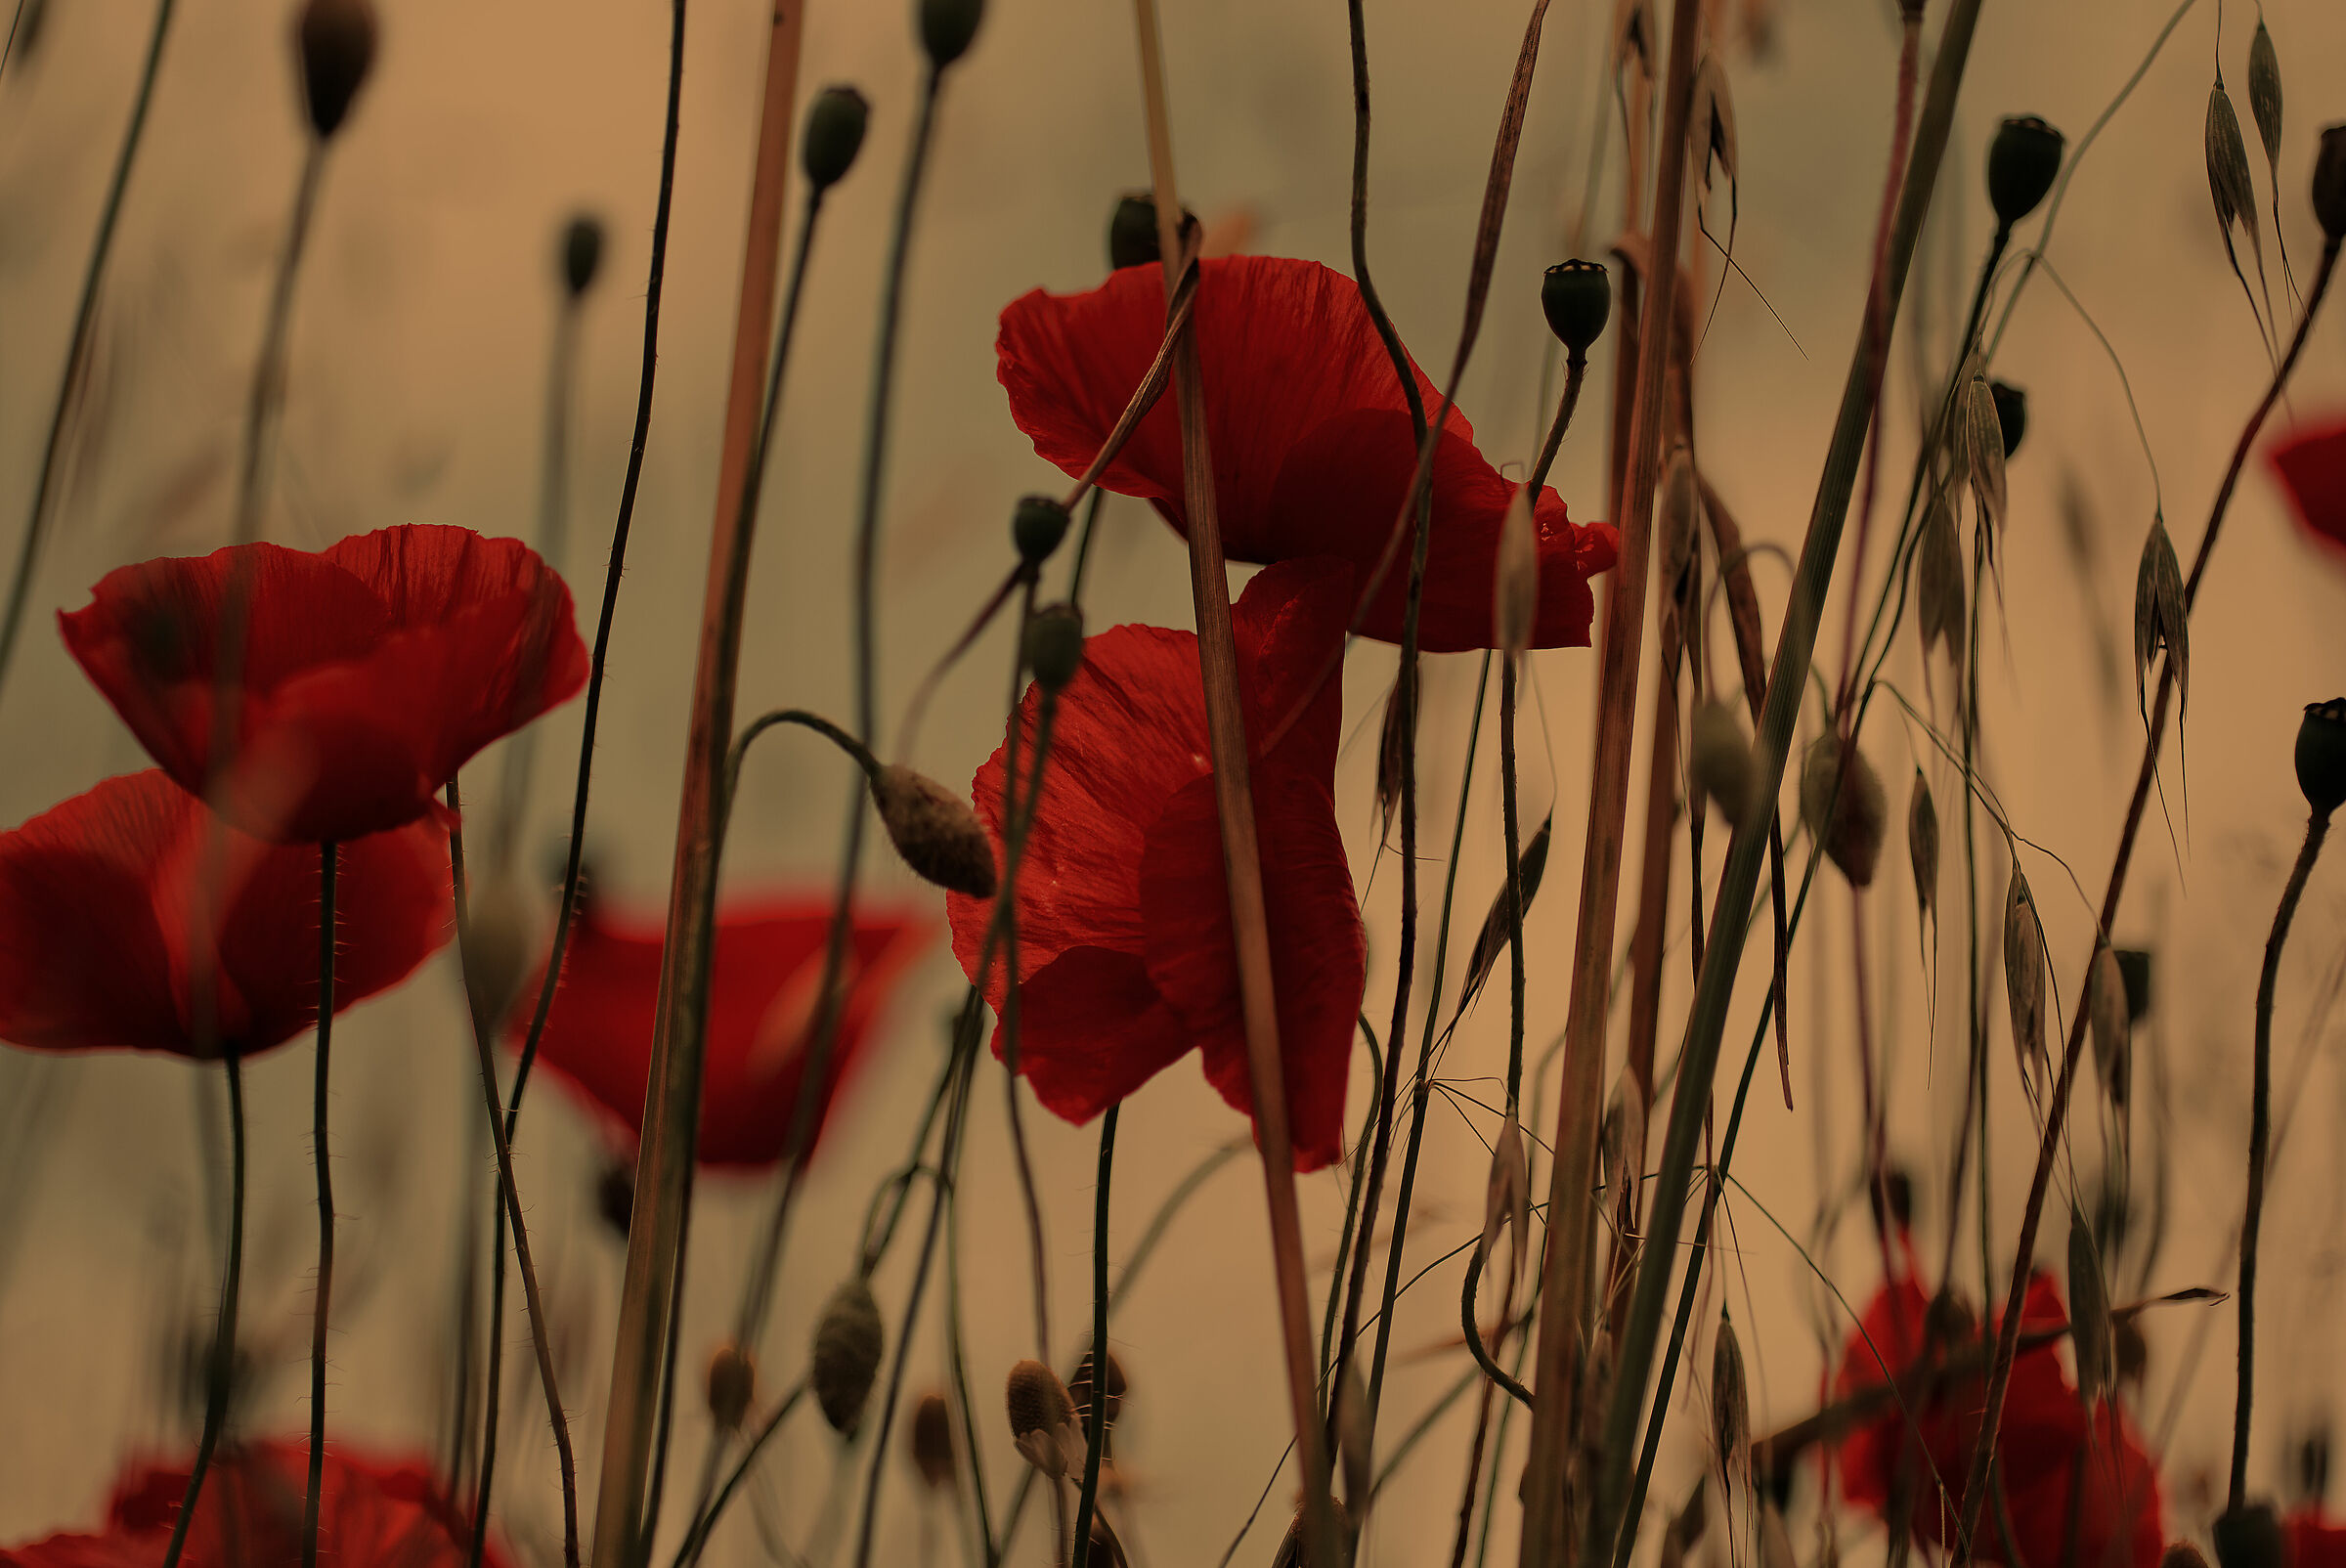 You know poppies are tall, tall, tall.......